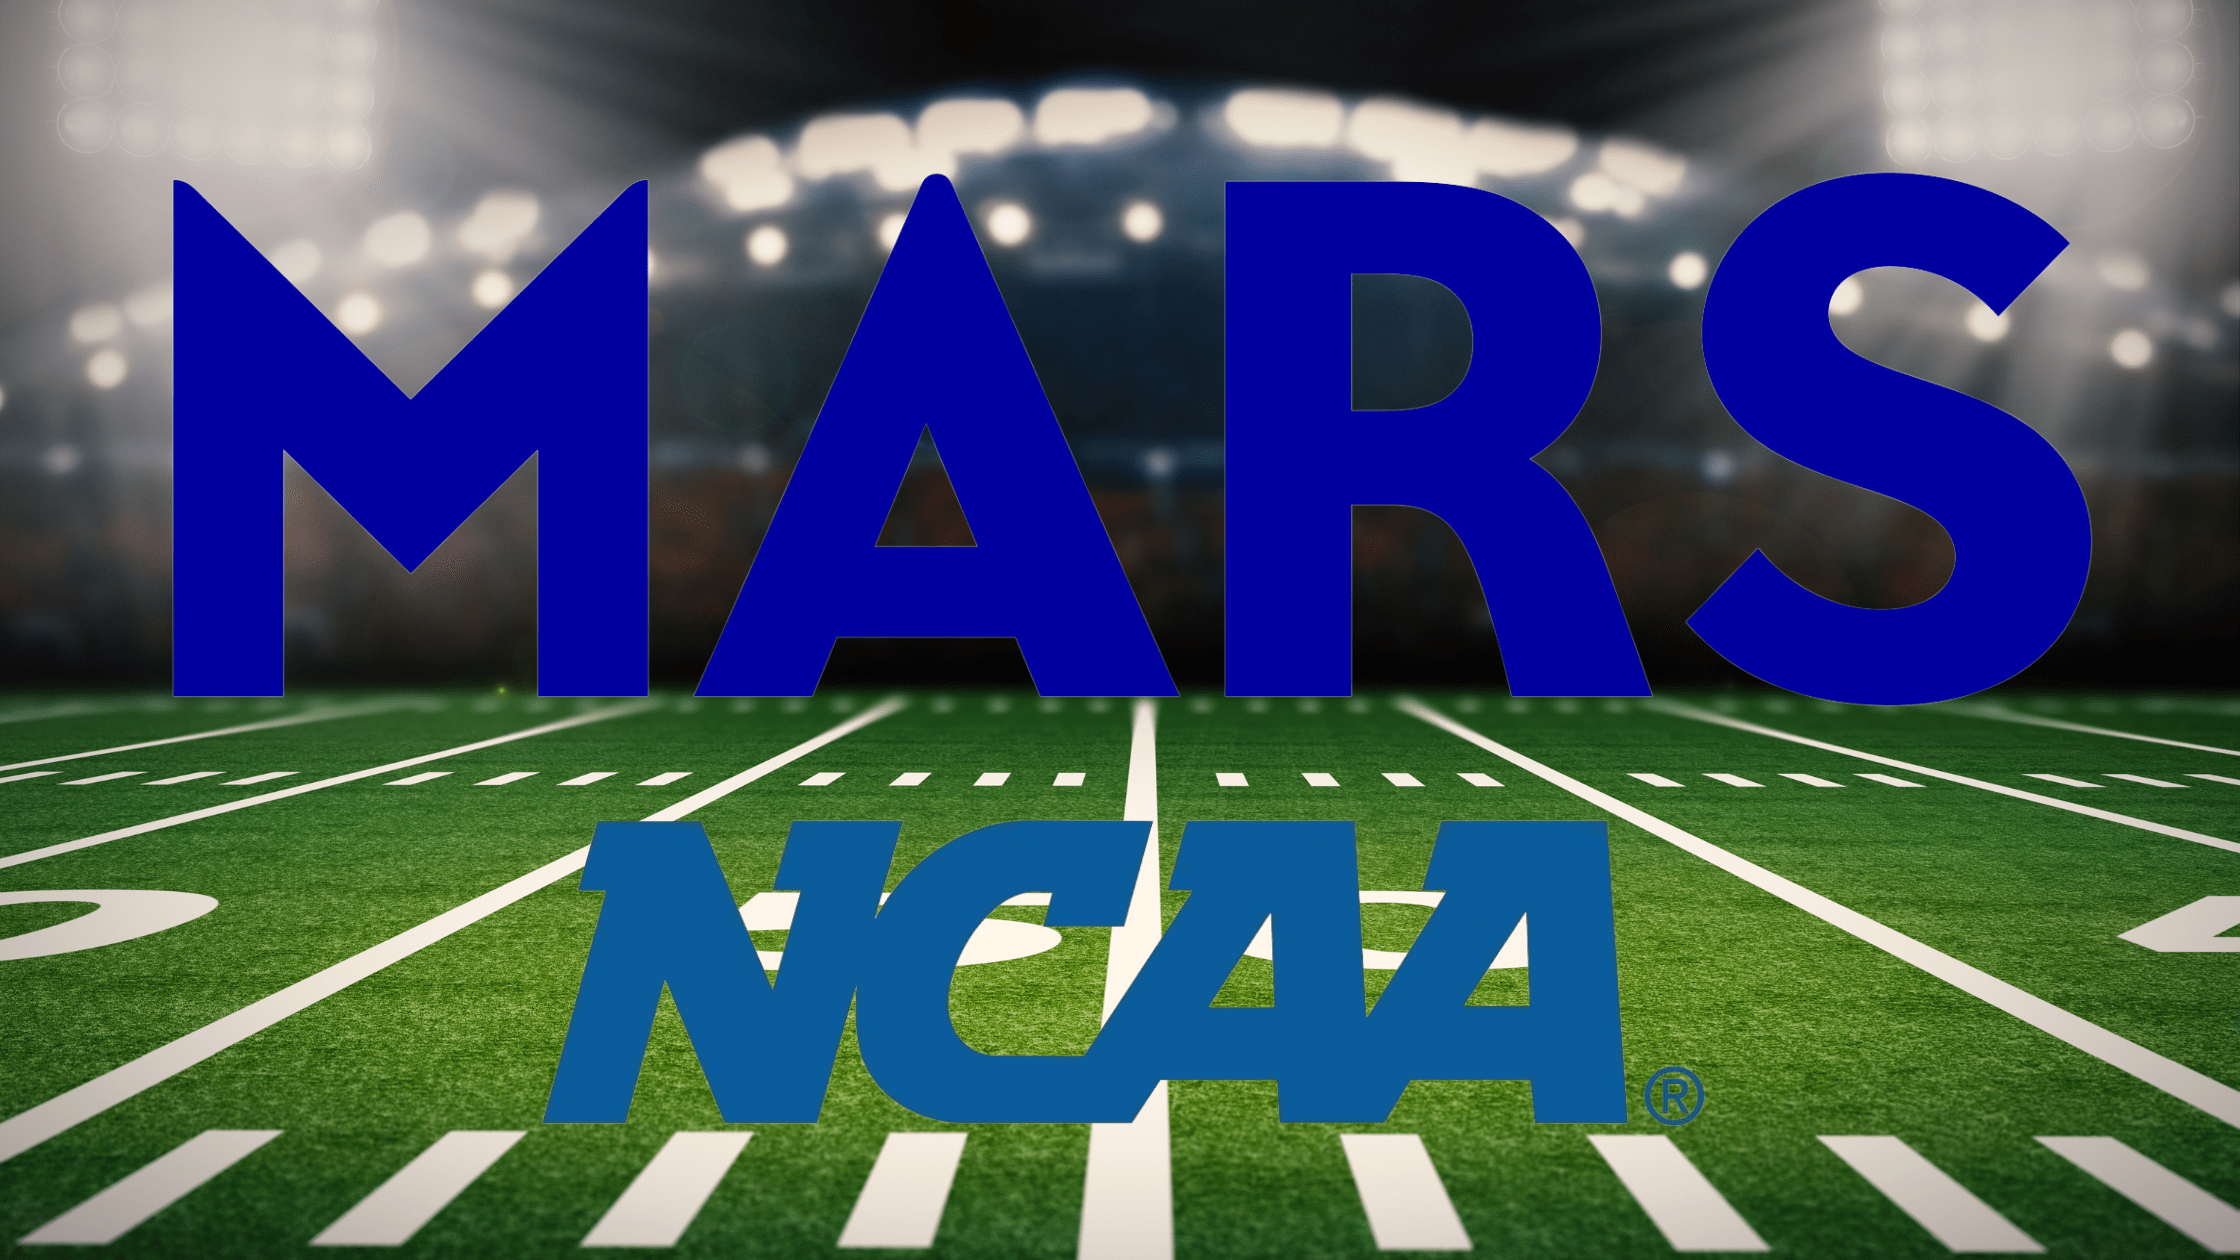 Mars Partners with College Football Stars in New NIL Deal